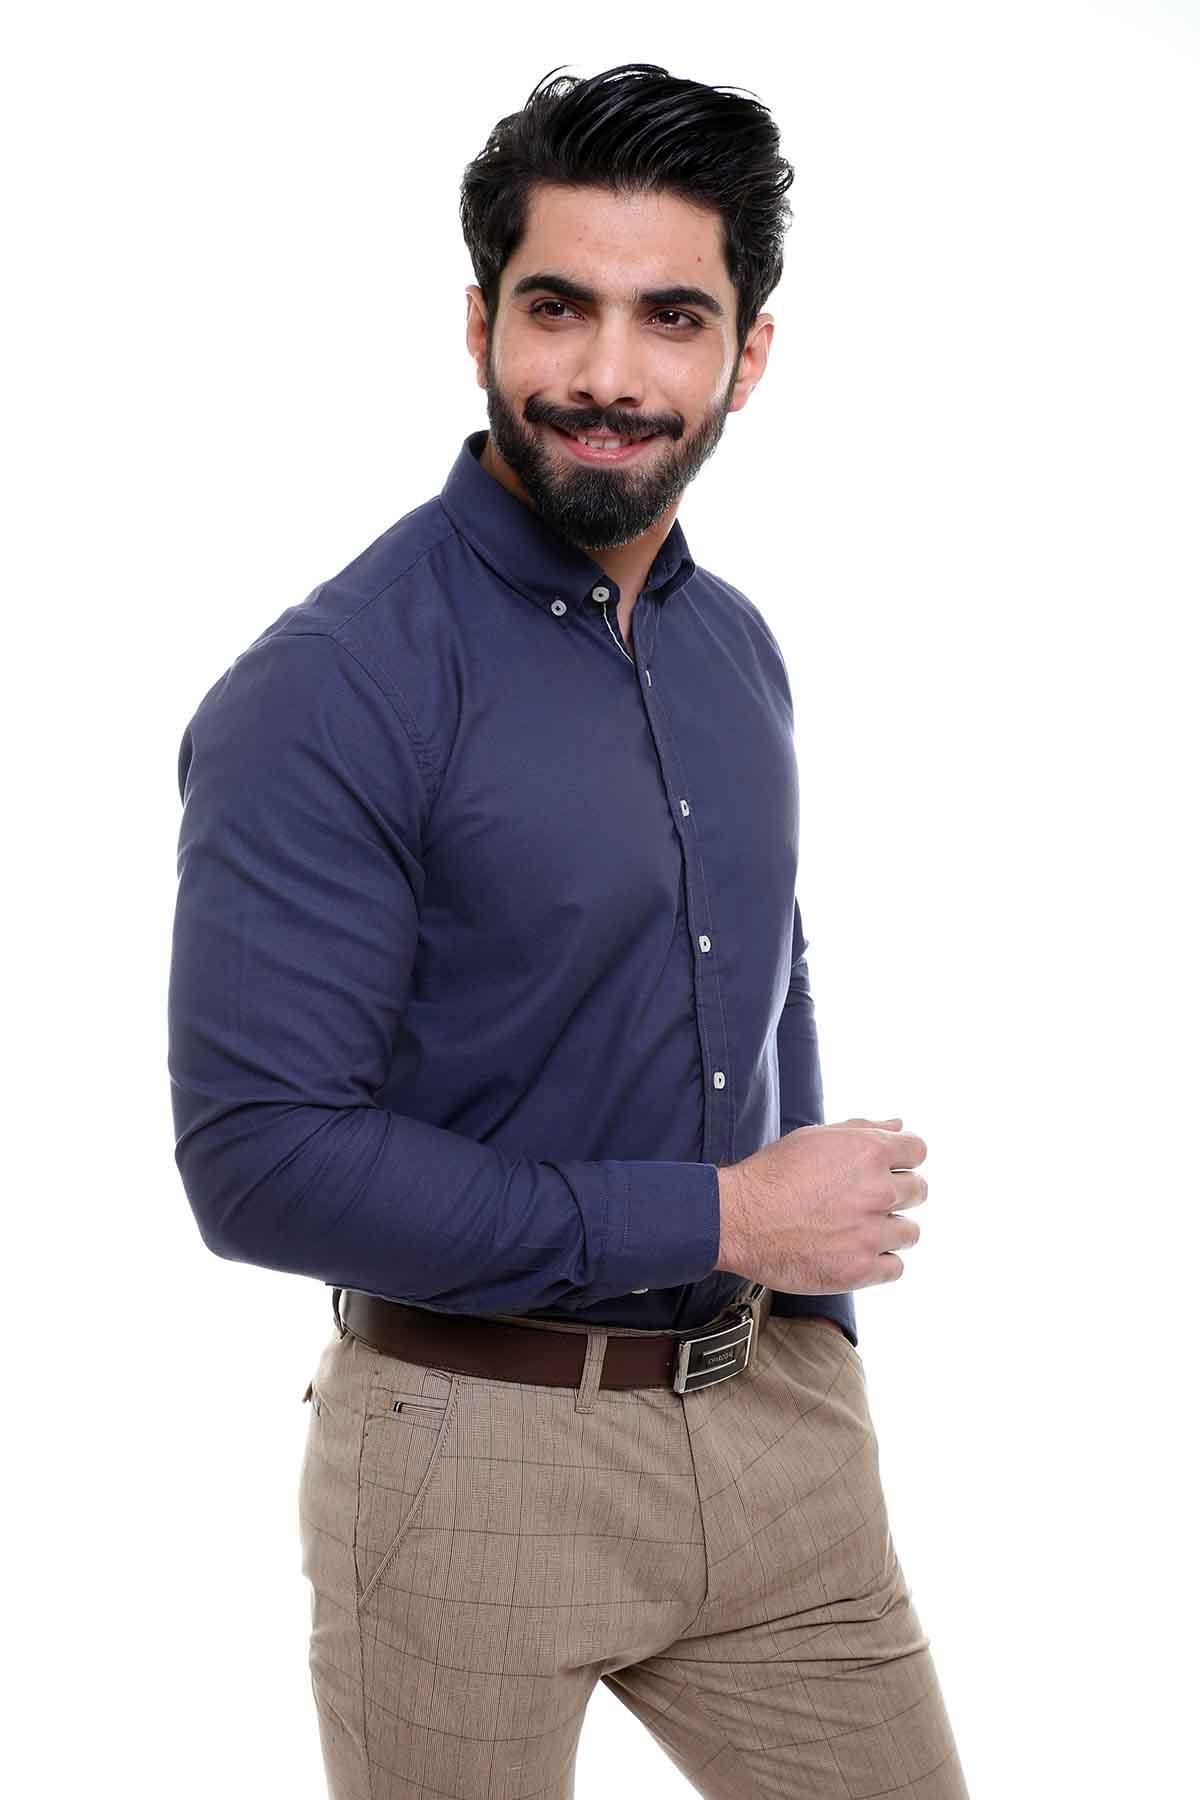 SMART SHIRT BUTTON DOWN FULL SLEEVE NAVY at Charcoal Clothing